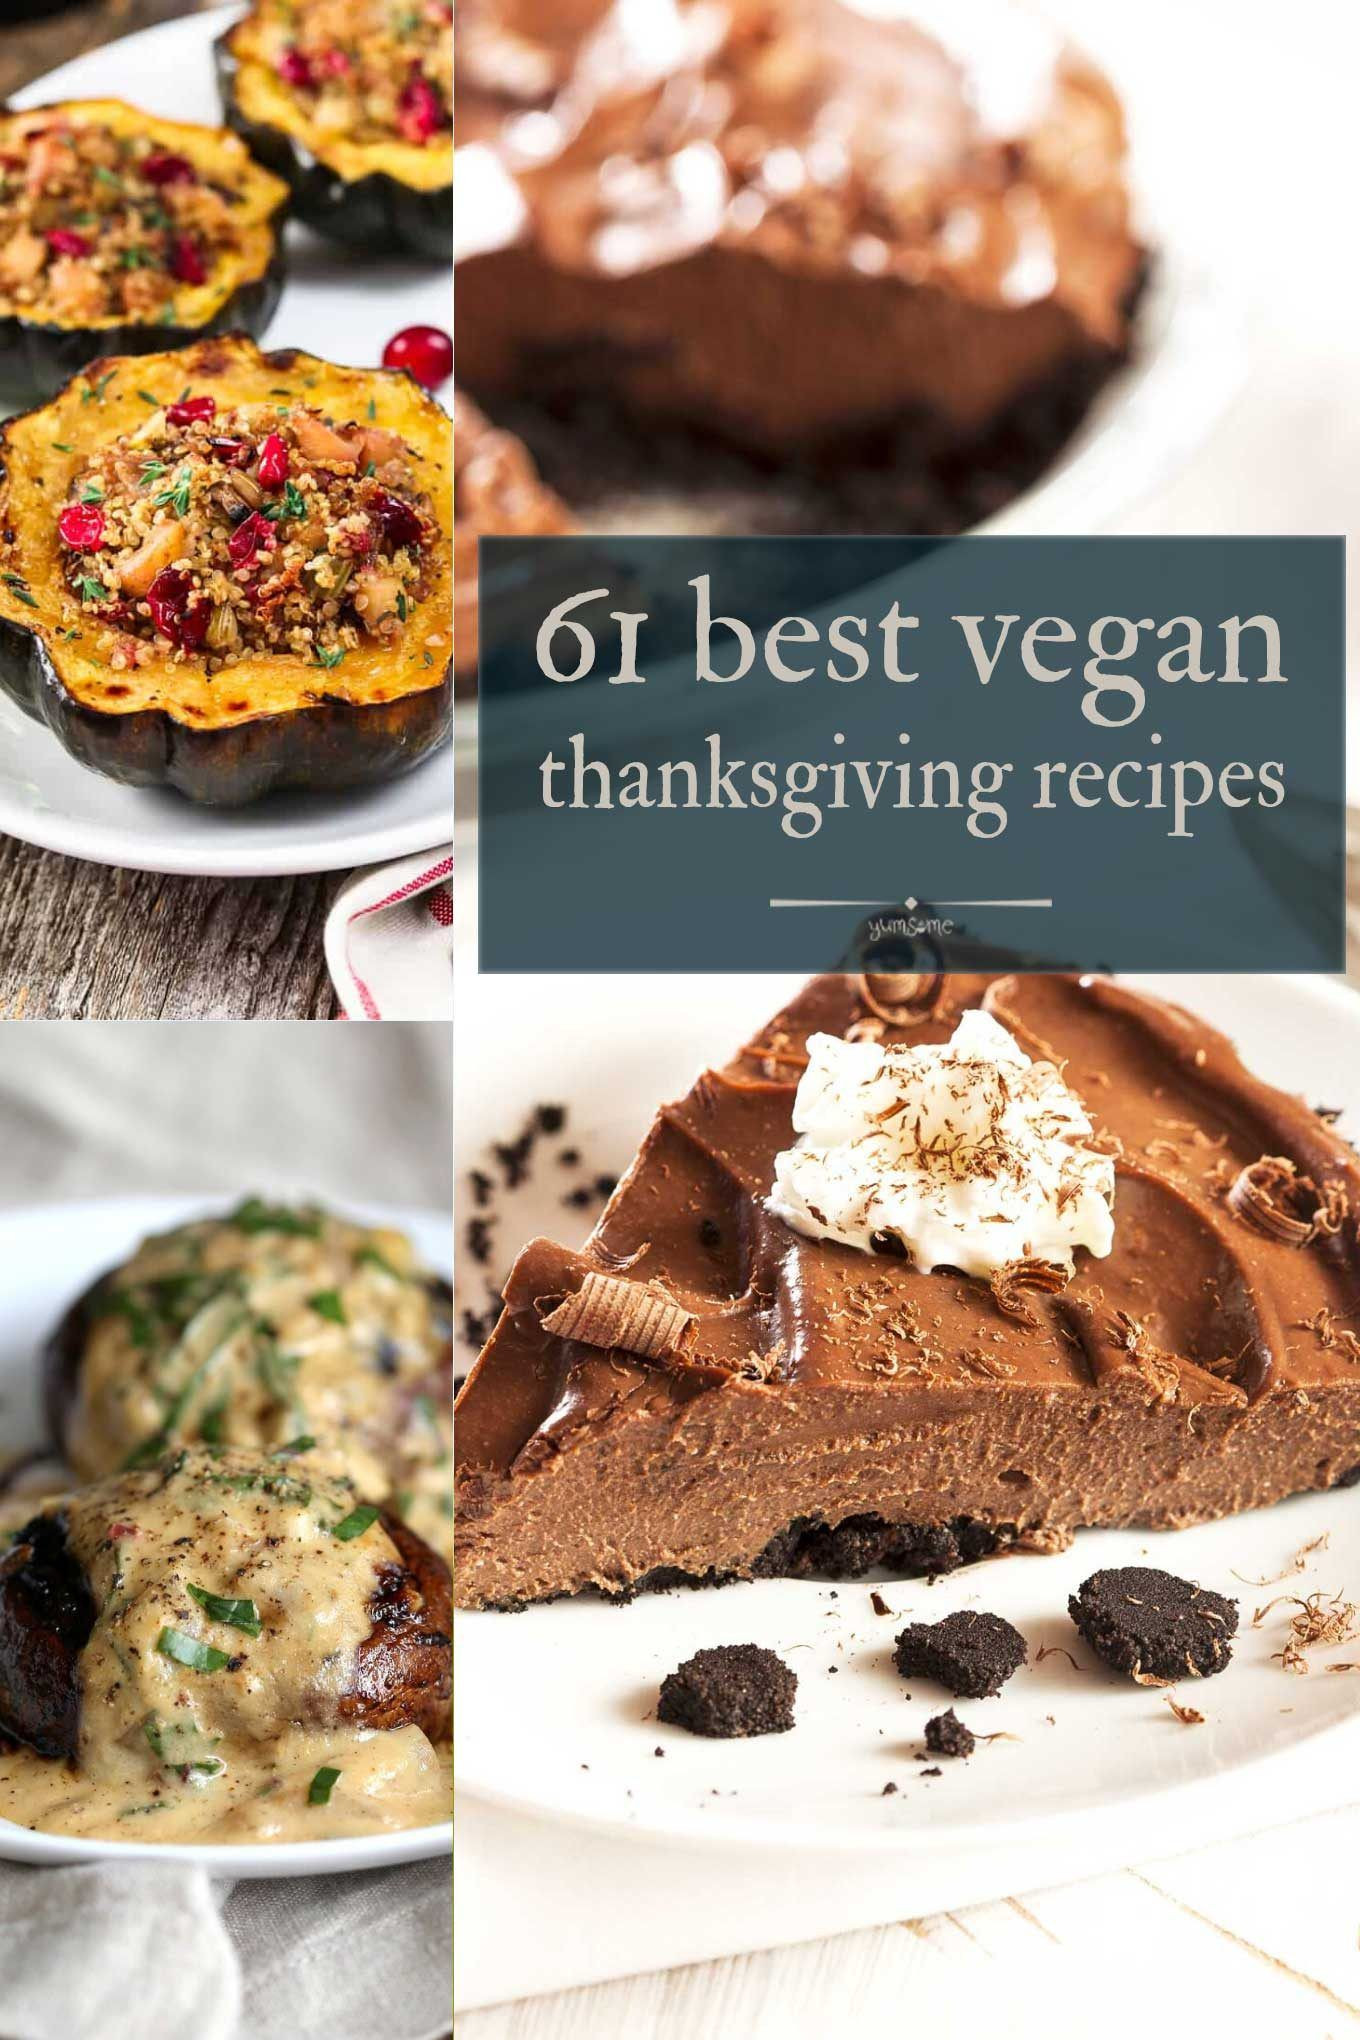 Vegan Thanksgiving Appetizers
 61 Best Vegan Thanksgiving Recipes With images